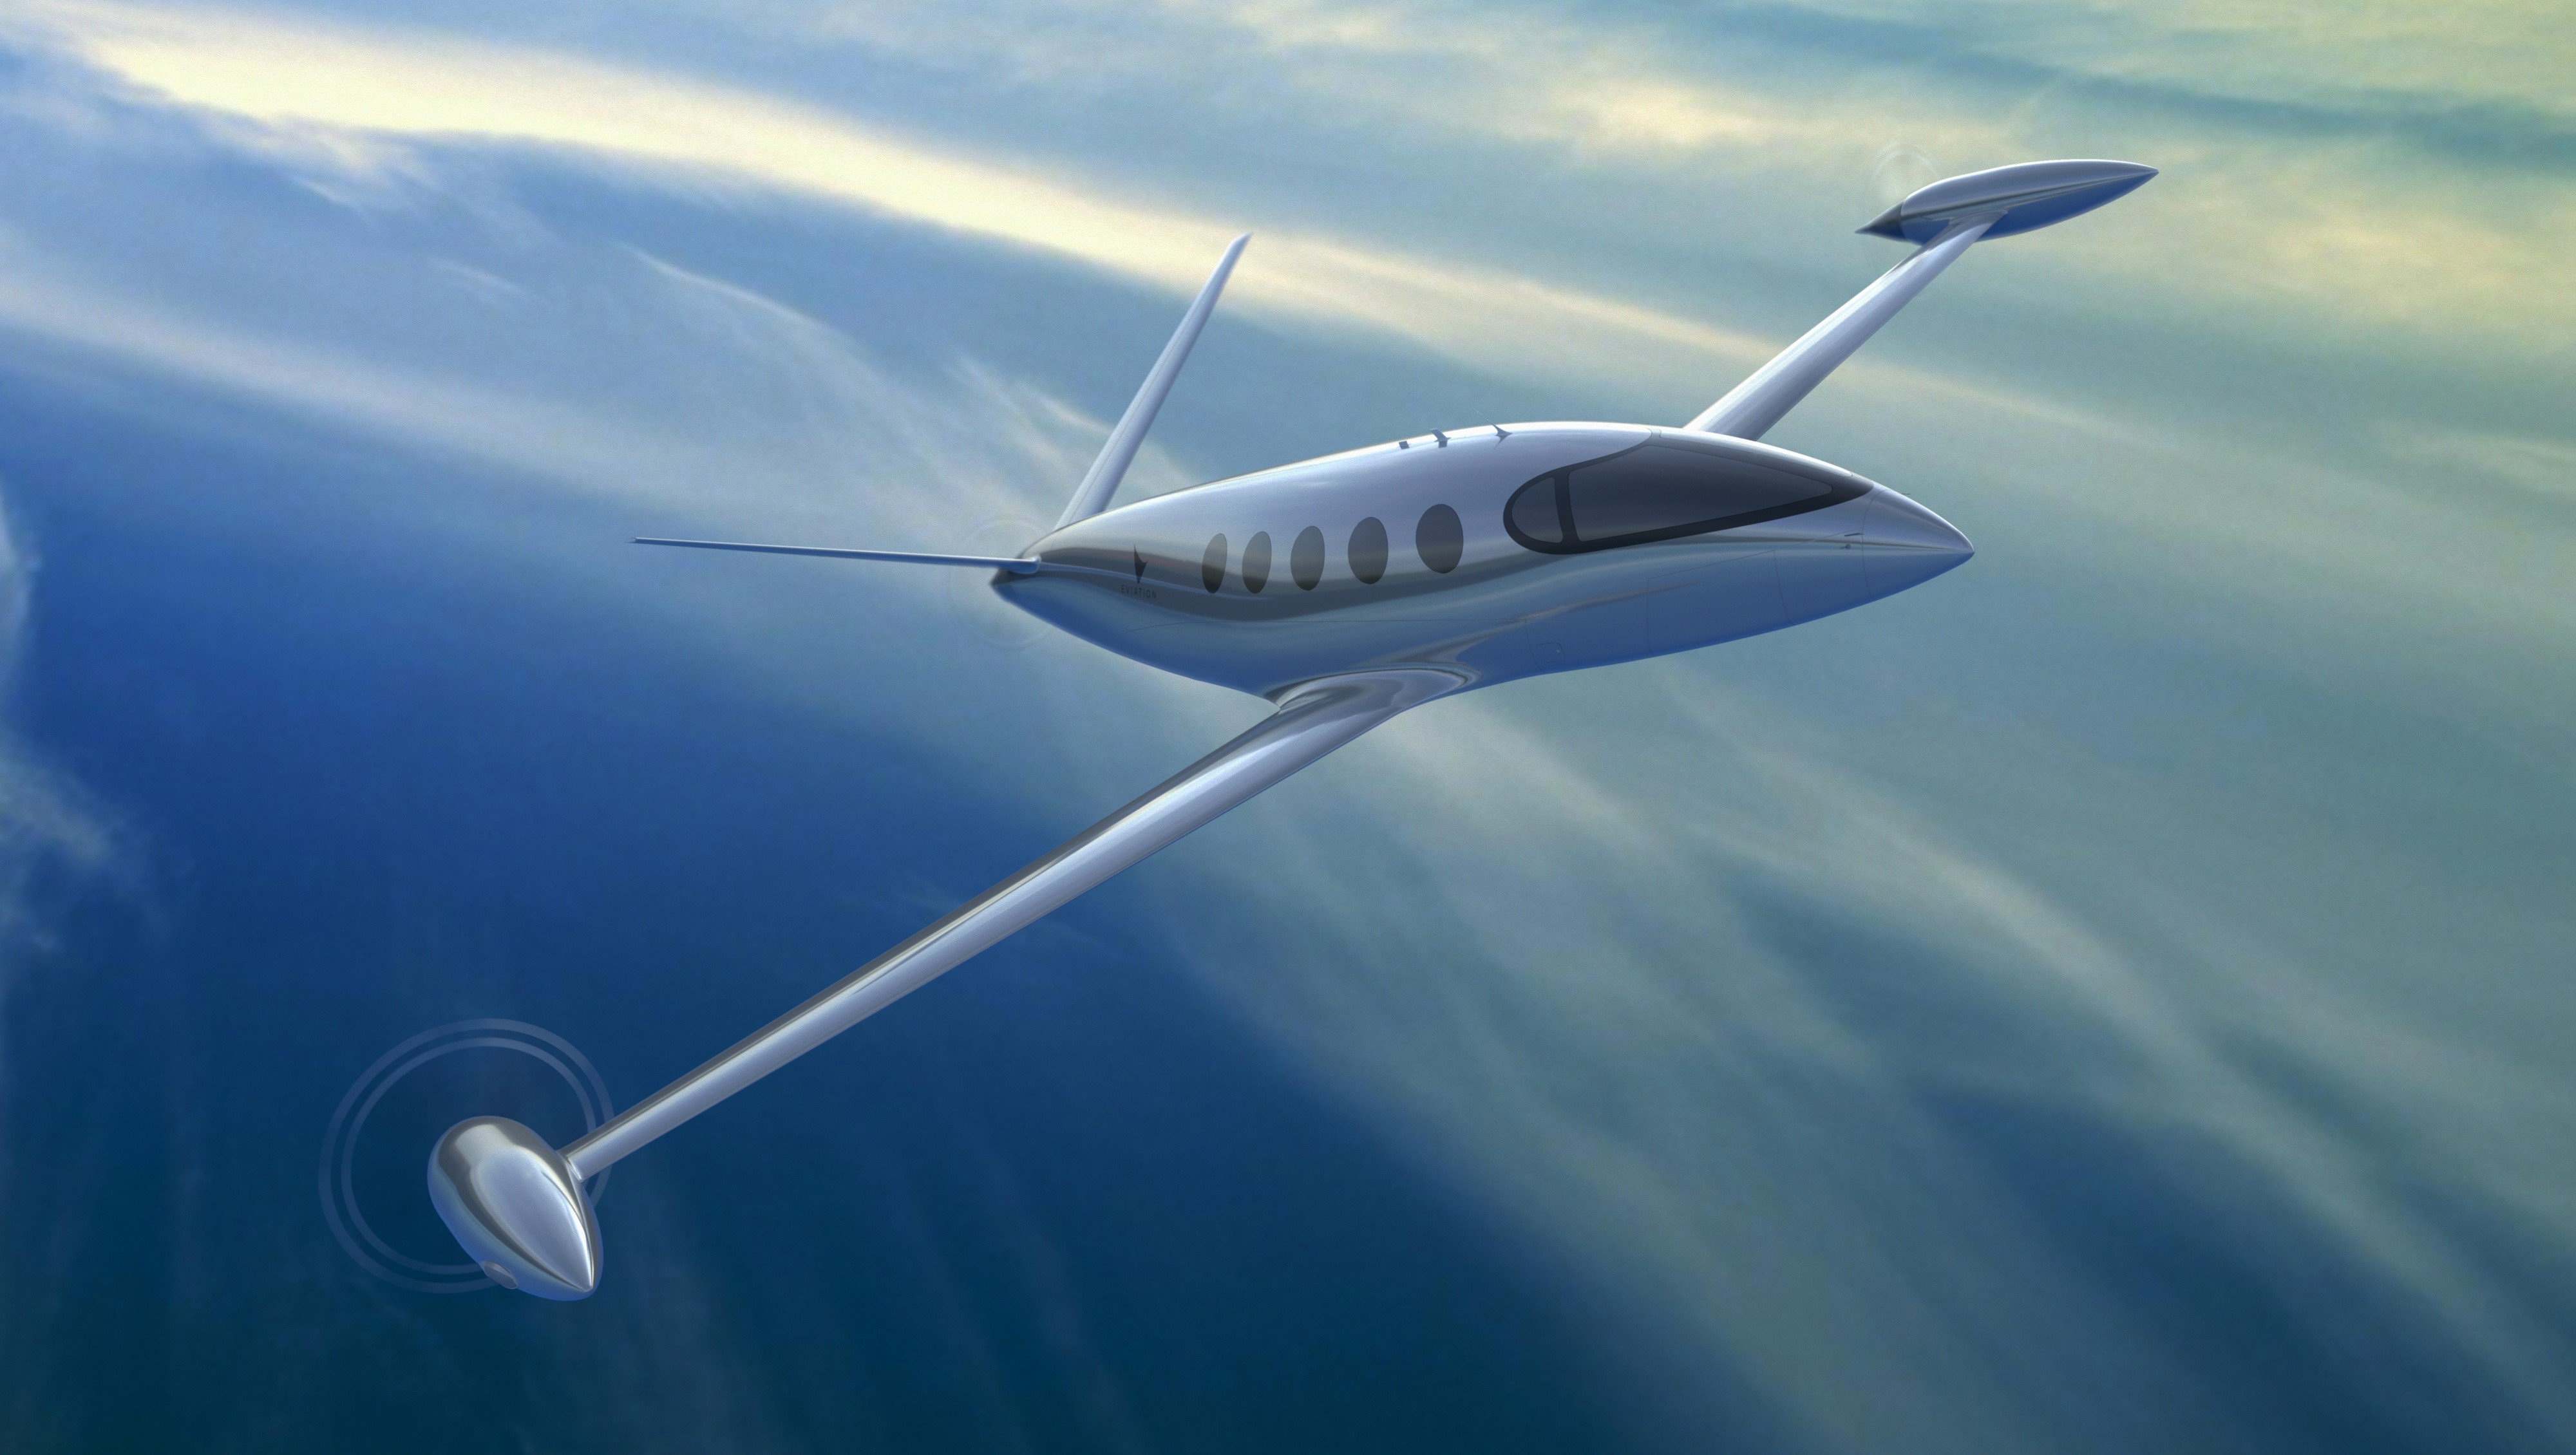 The Eviation Alice uses the lightest possible carbon fiber composite airframe.